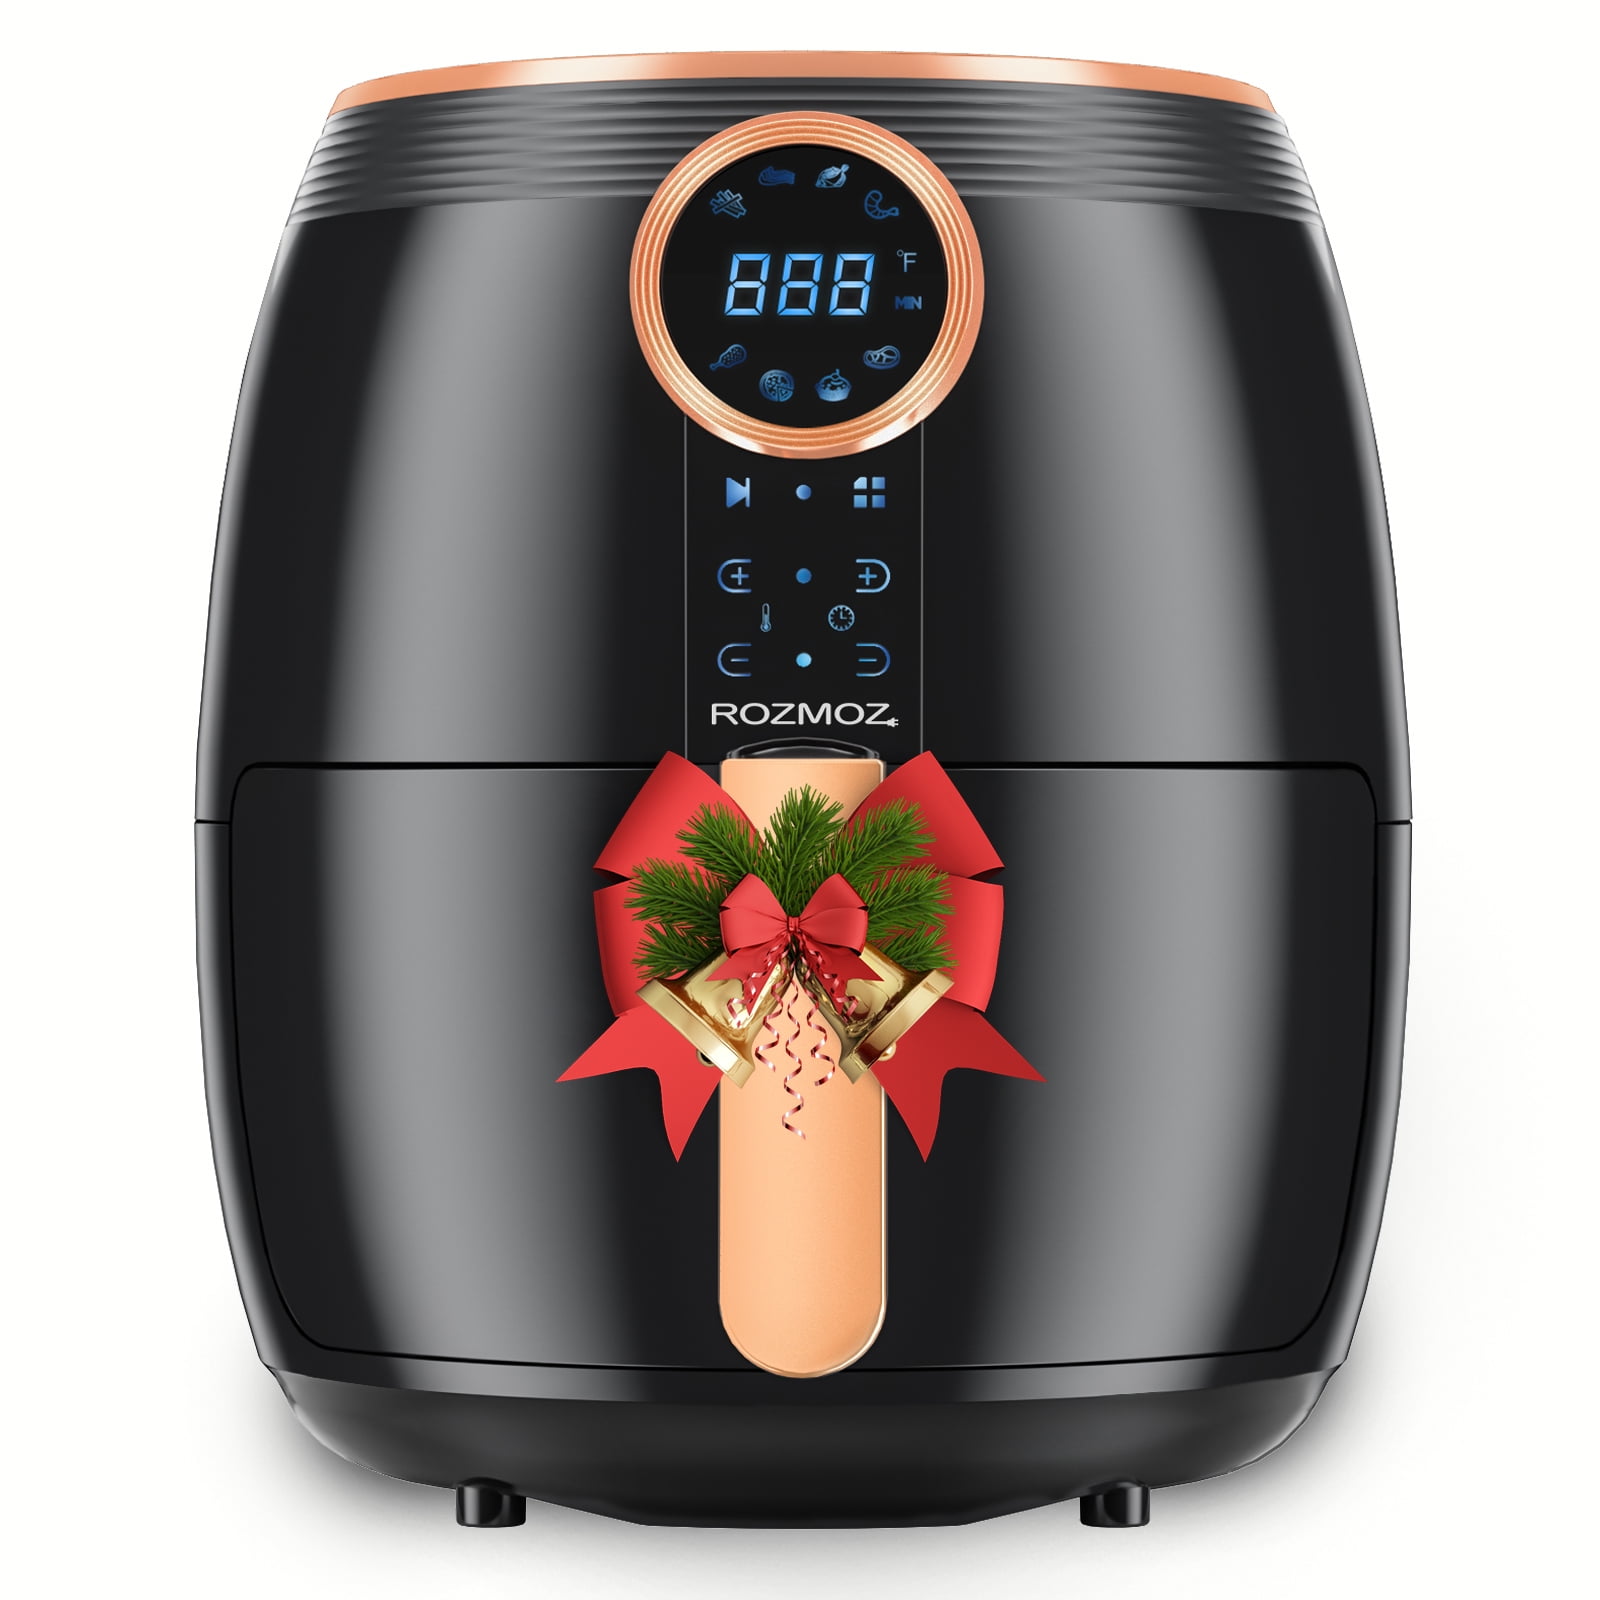 MOOSOO Air Fryer, 2 Quart Small Air Fryer Oven, with Touchscreen, Overheat  Protection, Dehydrator 